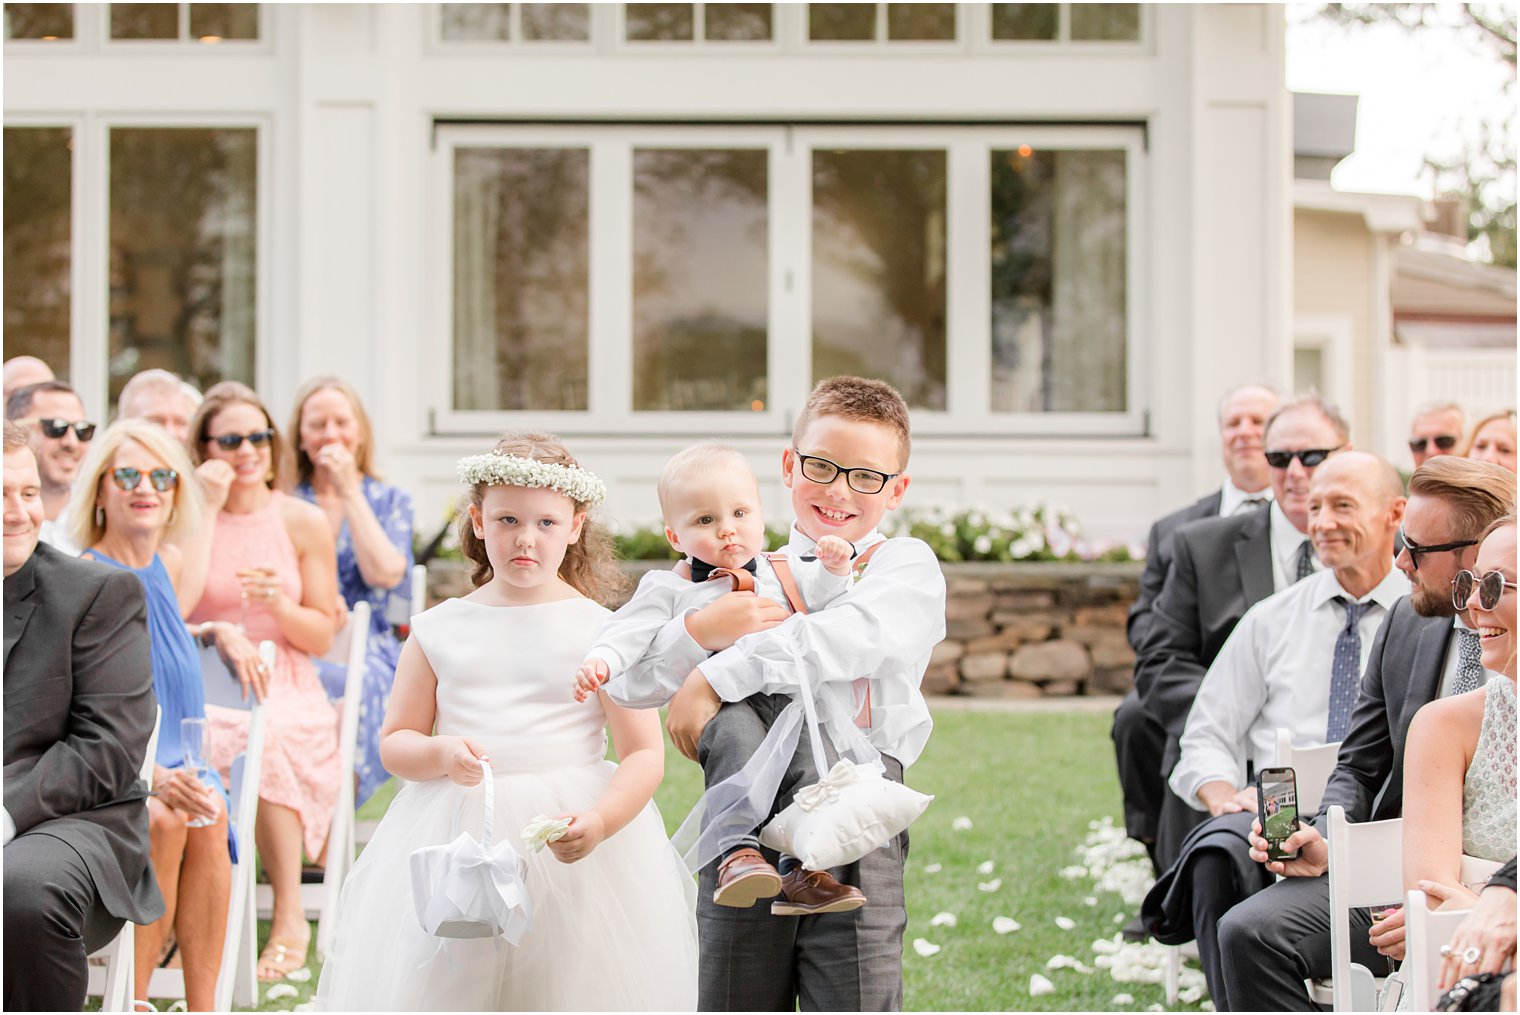 ring bearer carries baby down aisle with flower girl